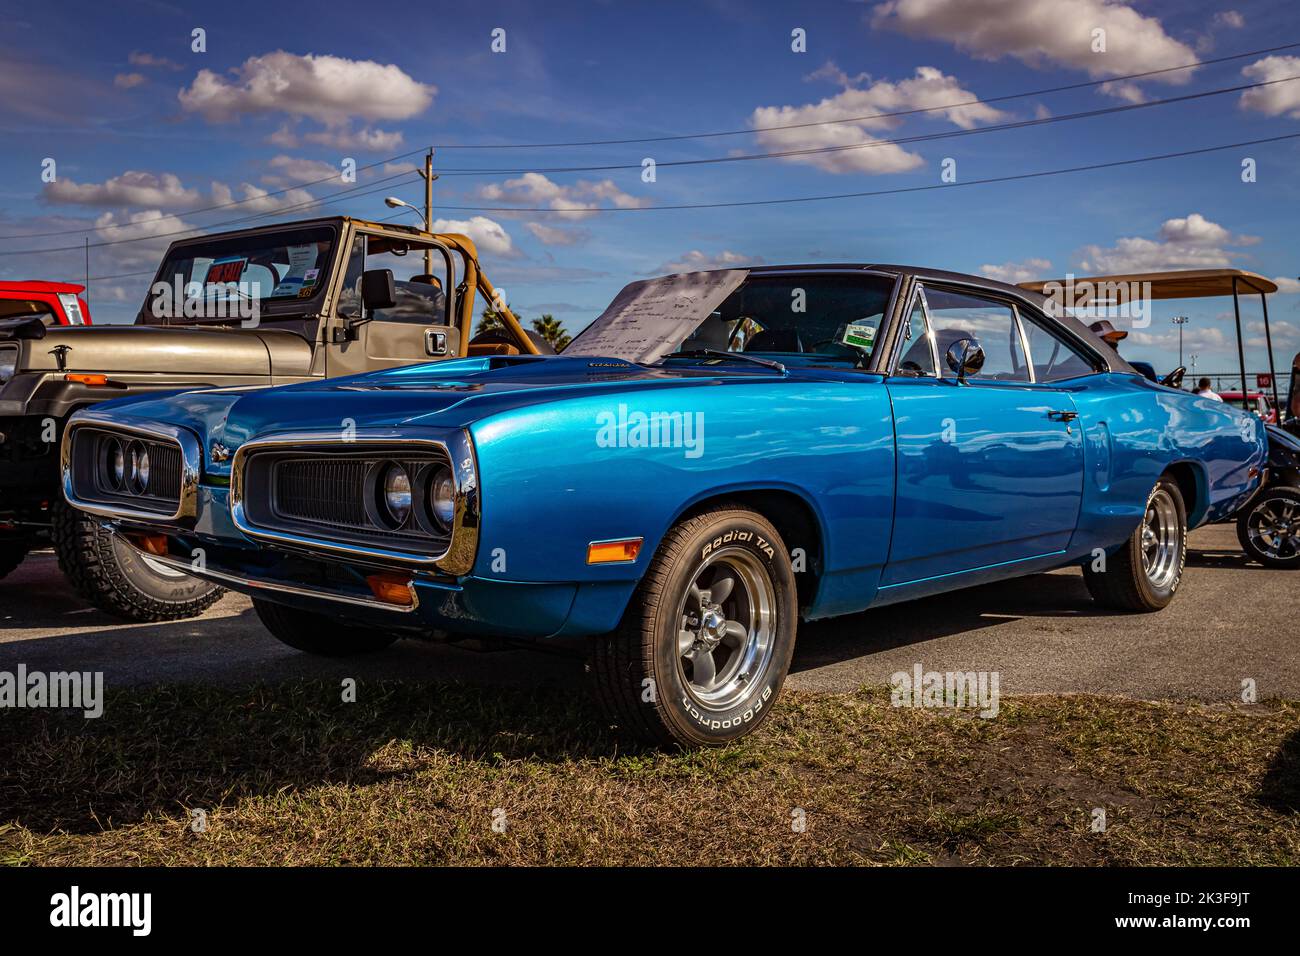 Daytona Beach, FL - November 28, 2020: Low perspective front corner view of a 1970 Dodge Coronet 440 Super Bee Hardtop Coupe at a local car show. Stock Photo